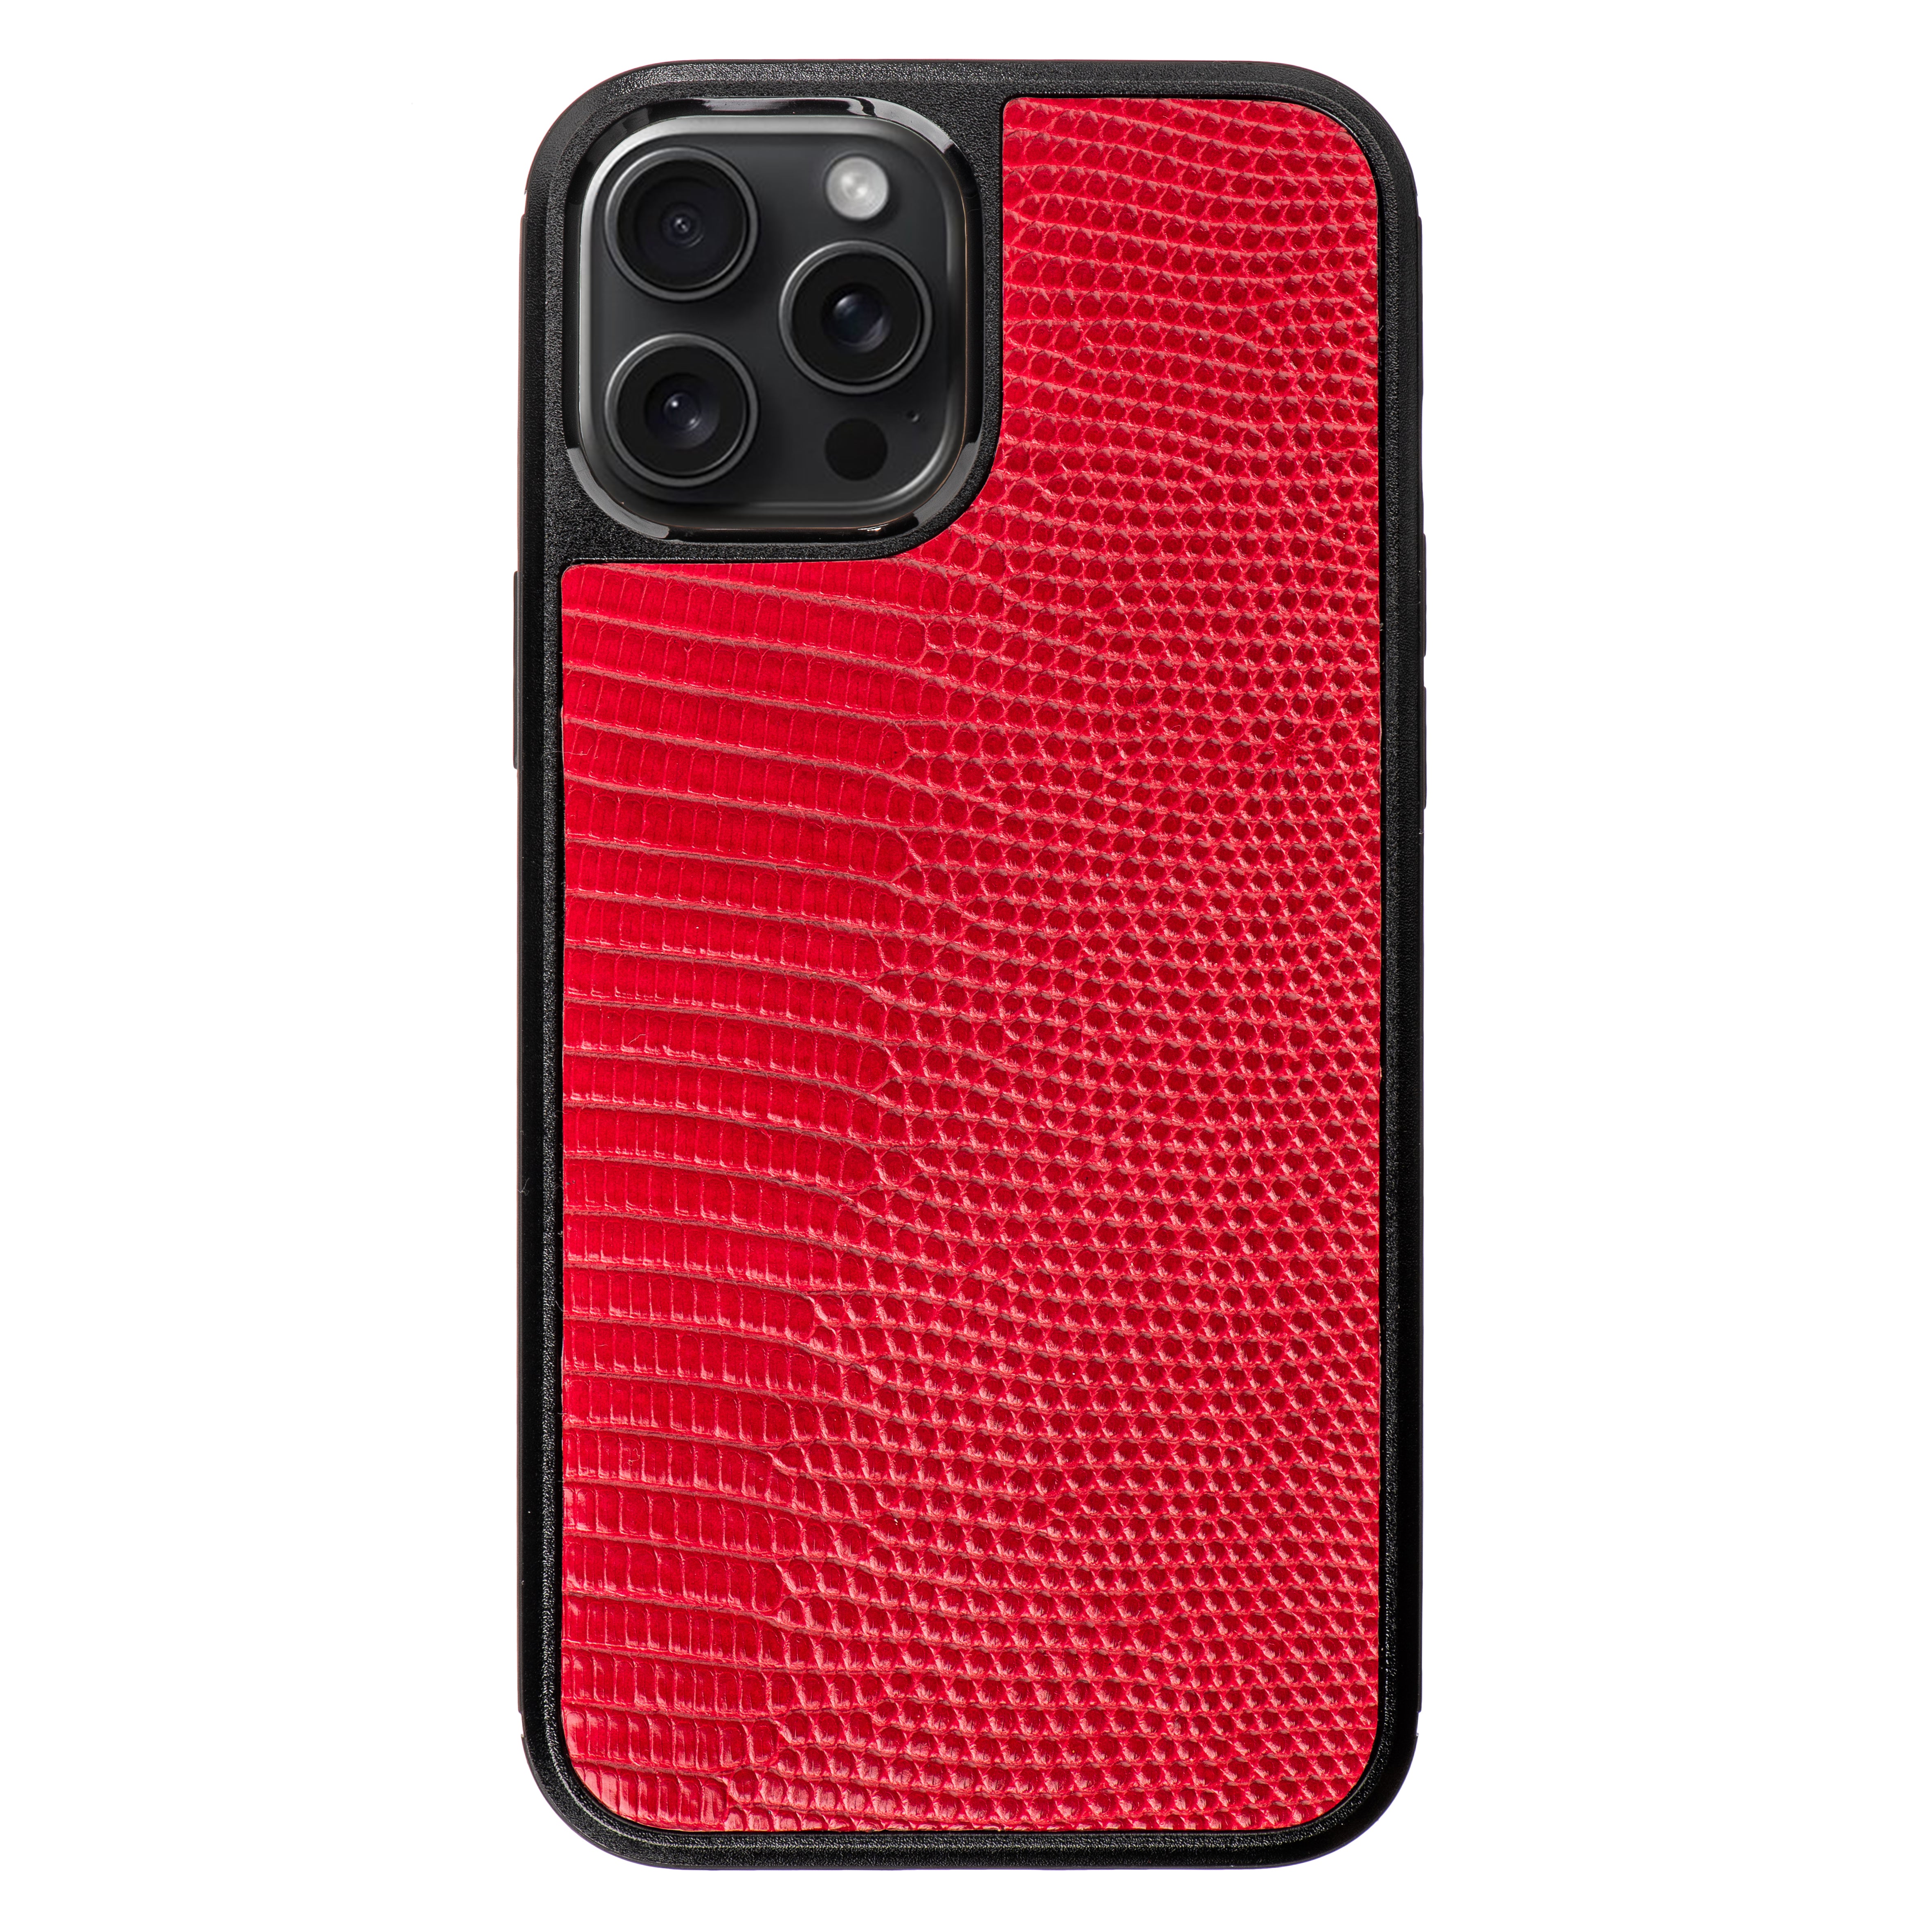 IPHONE 12 PRO MAX CASES LIZARD RED